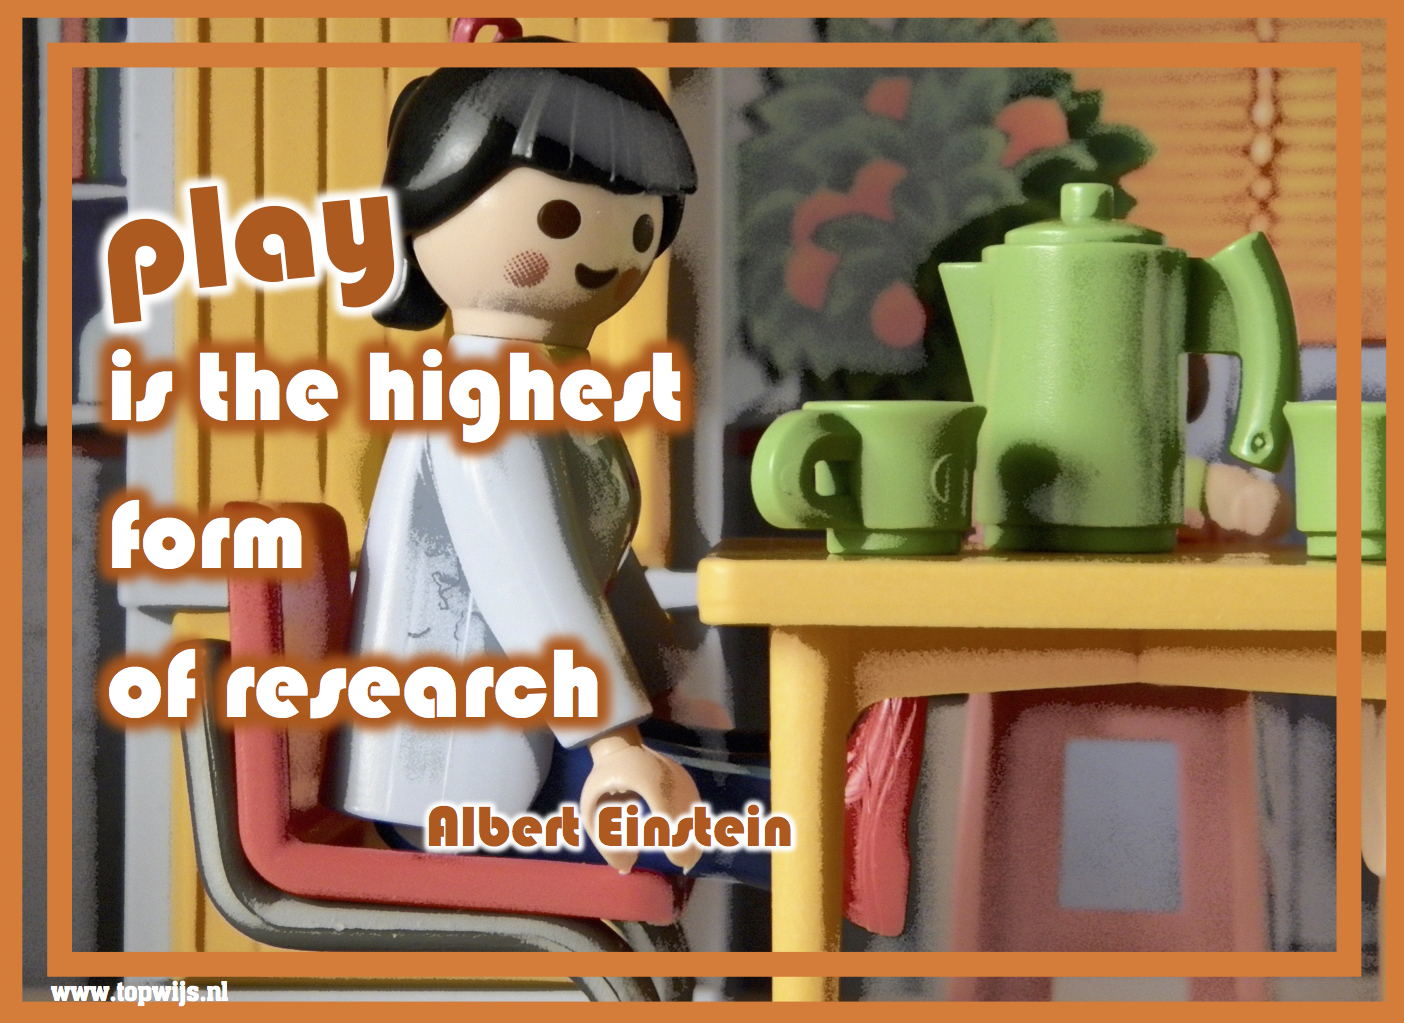 Einstein: Play is the highest form of research